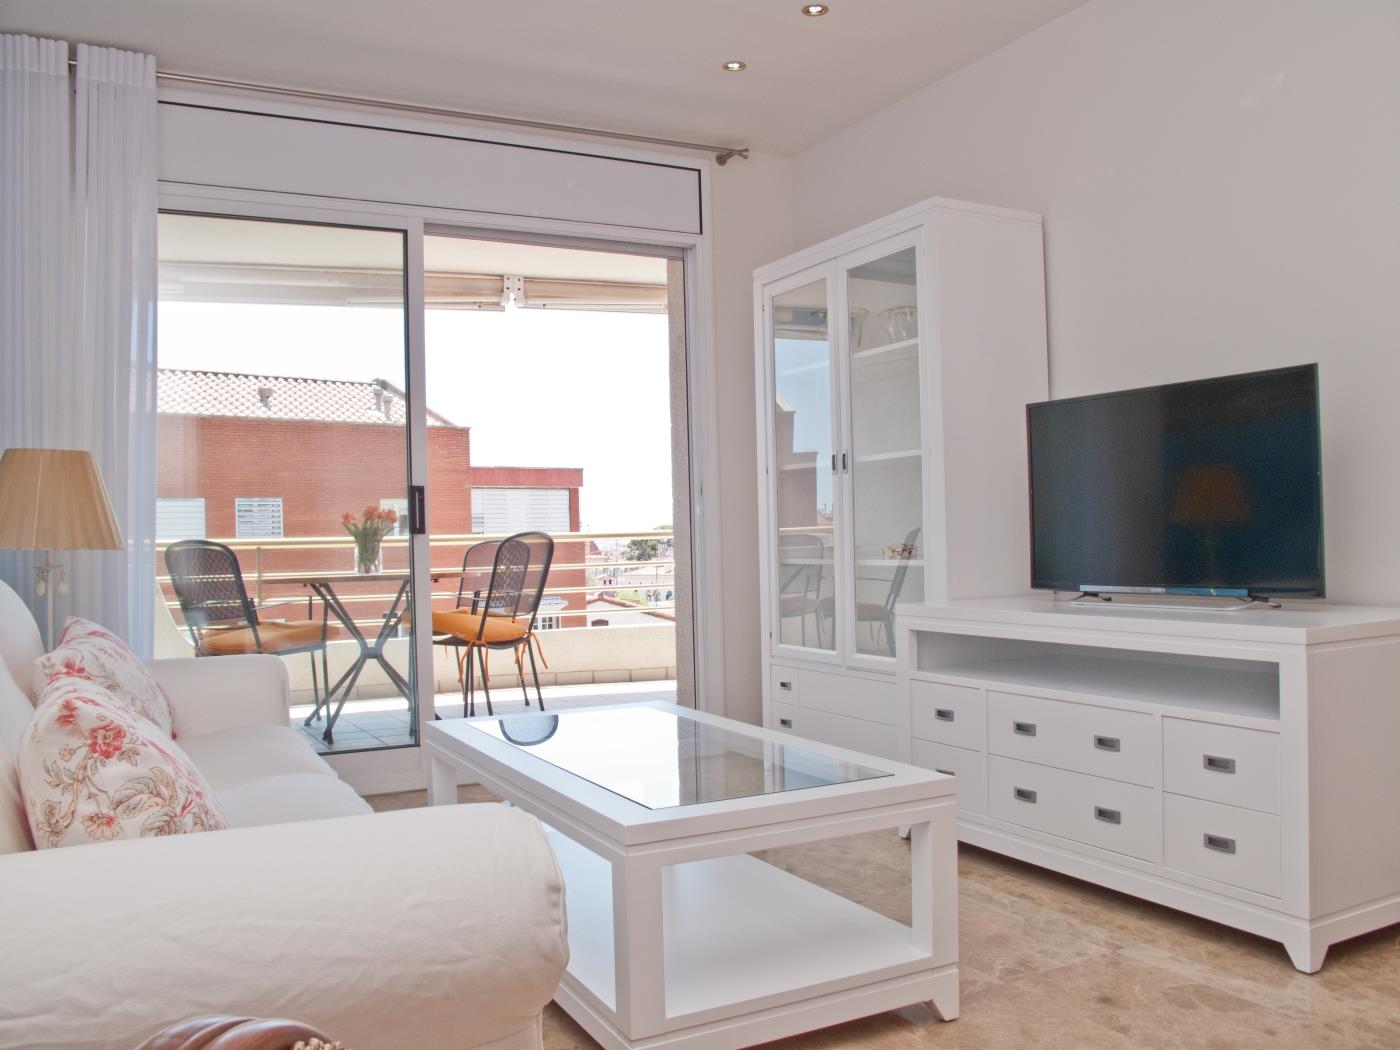 DELICIOUS BY BLAUSITGES Elegant apartment with pool in Sitges. in SITGES